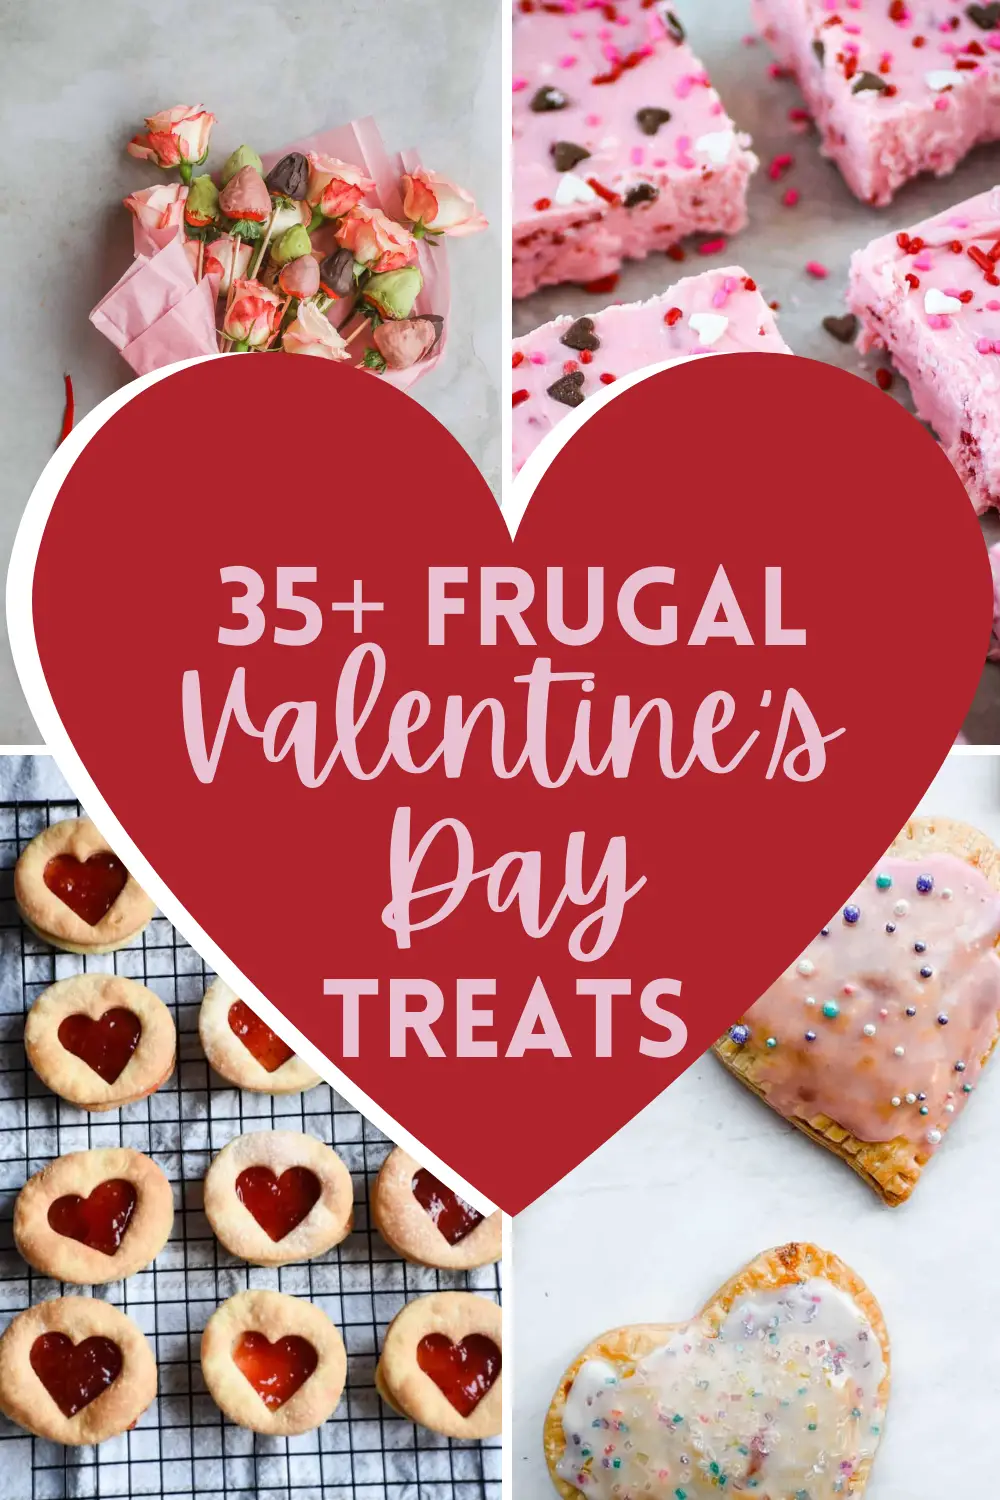 35+ Frugal Valentine’s Day Treats You’ll Love